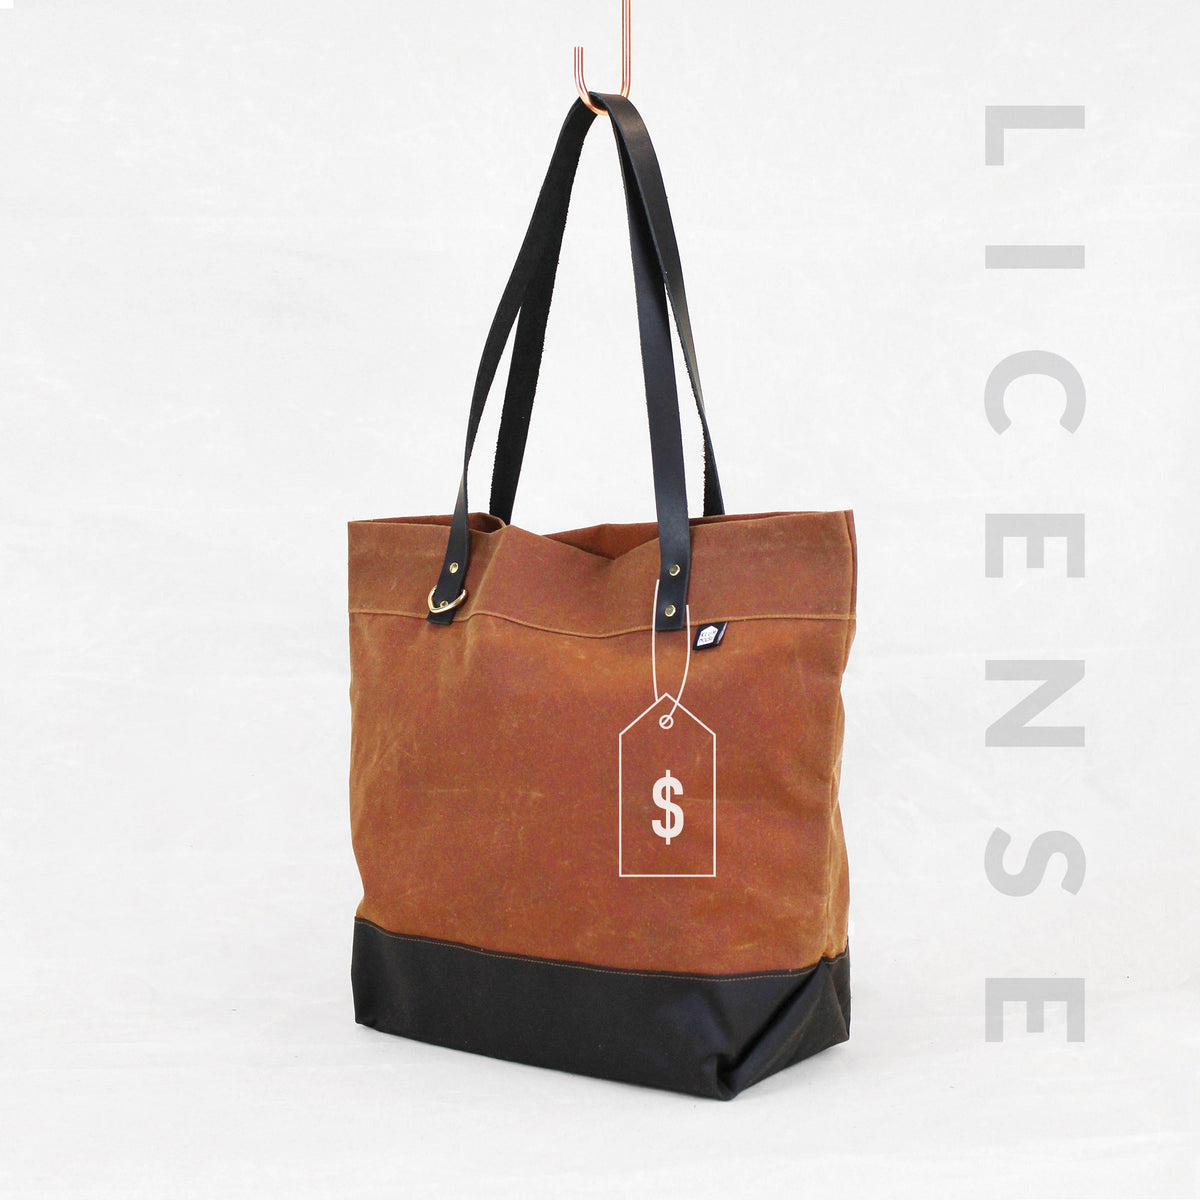 Portsmith Tote - License to Sell